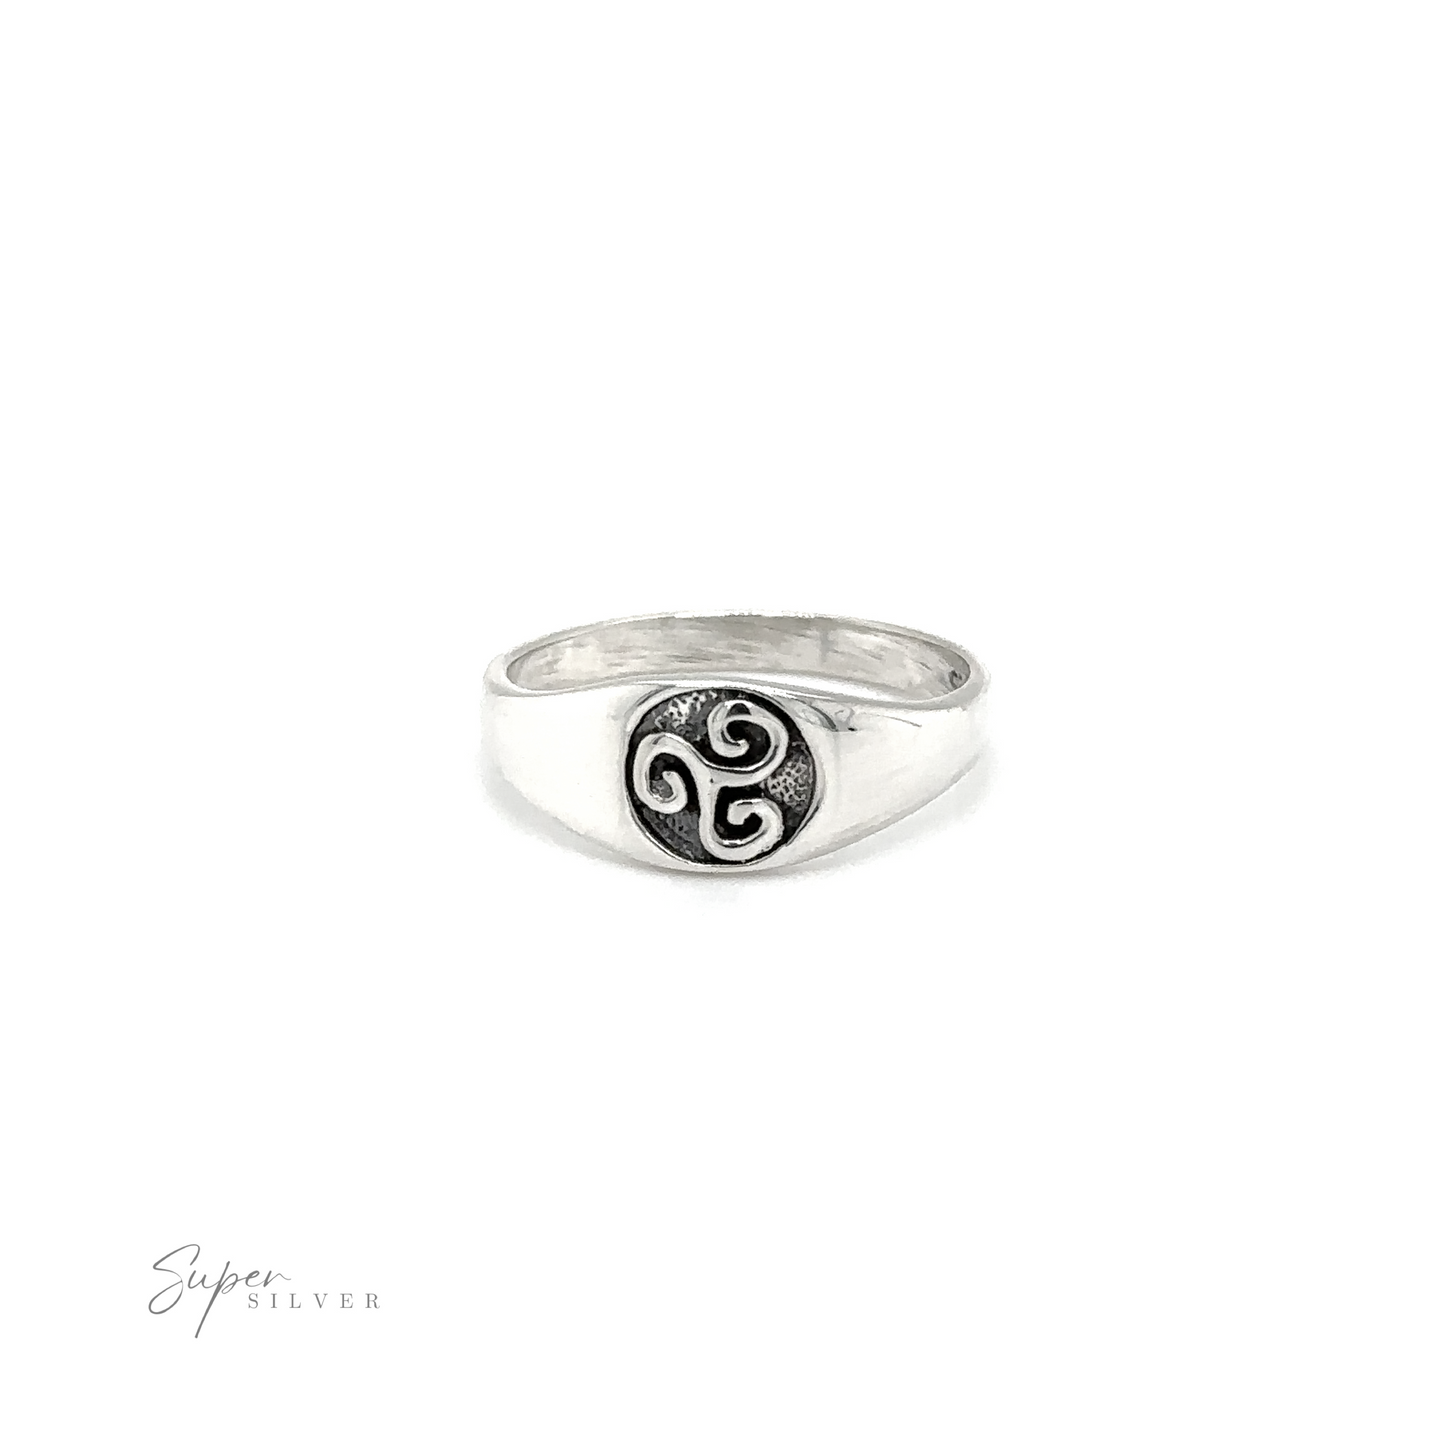 A Celtic Spiral signet ring with a black and white design.